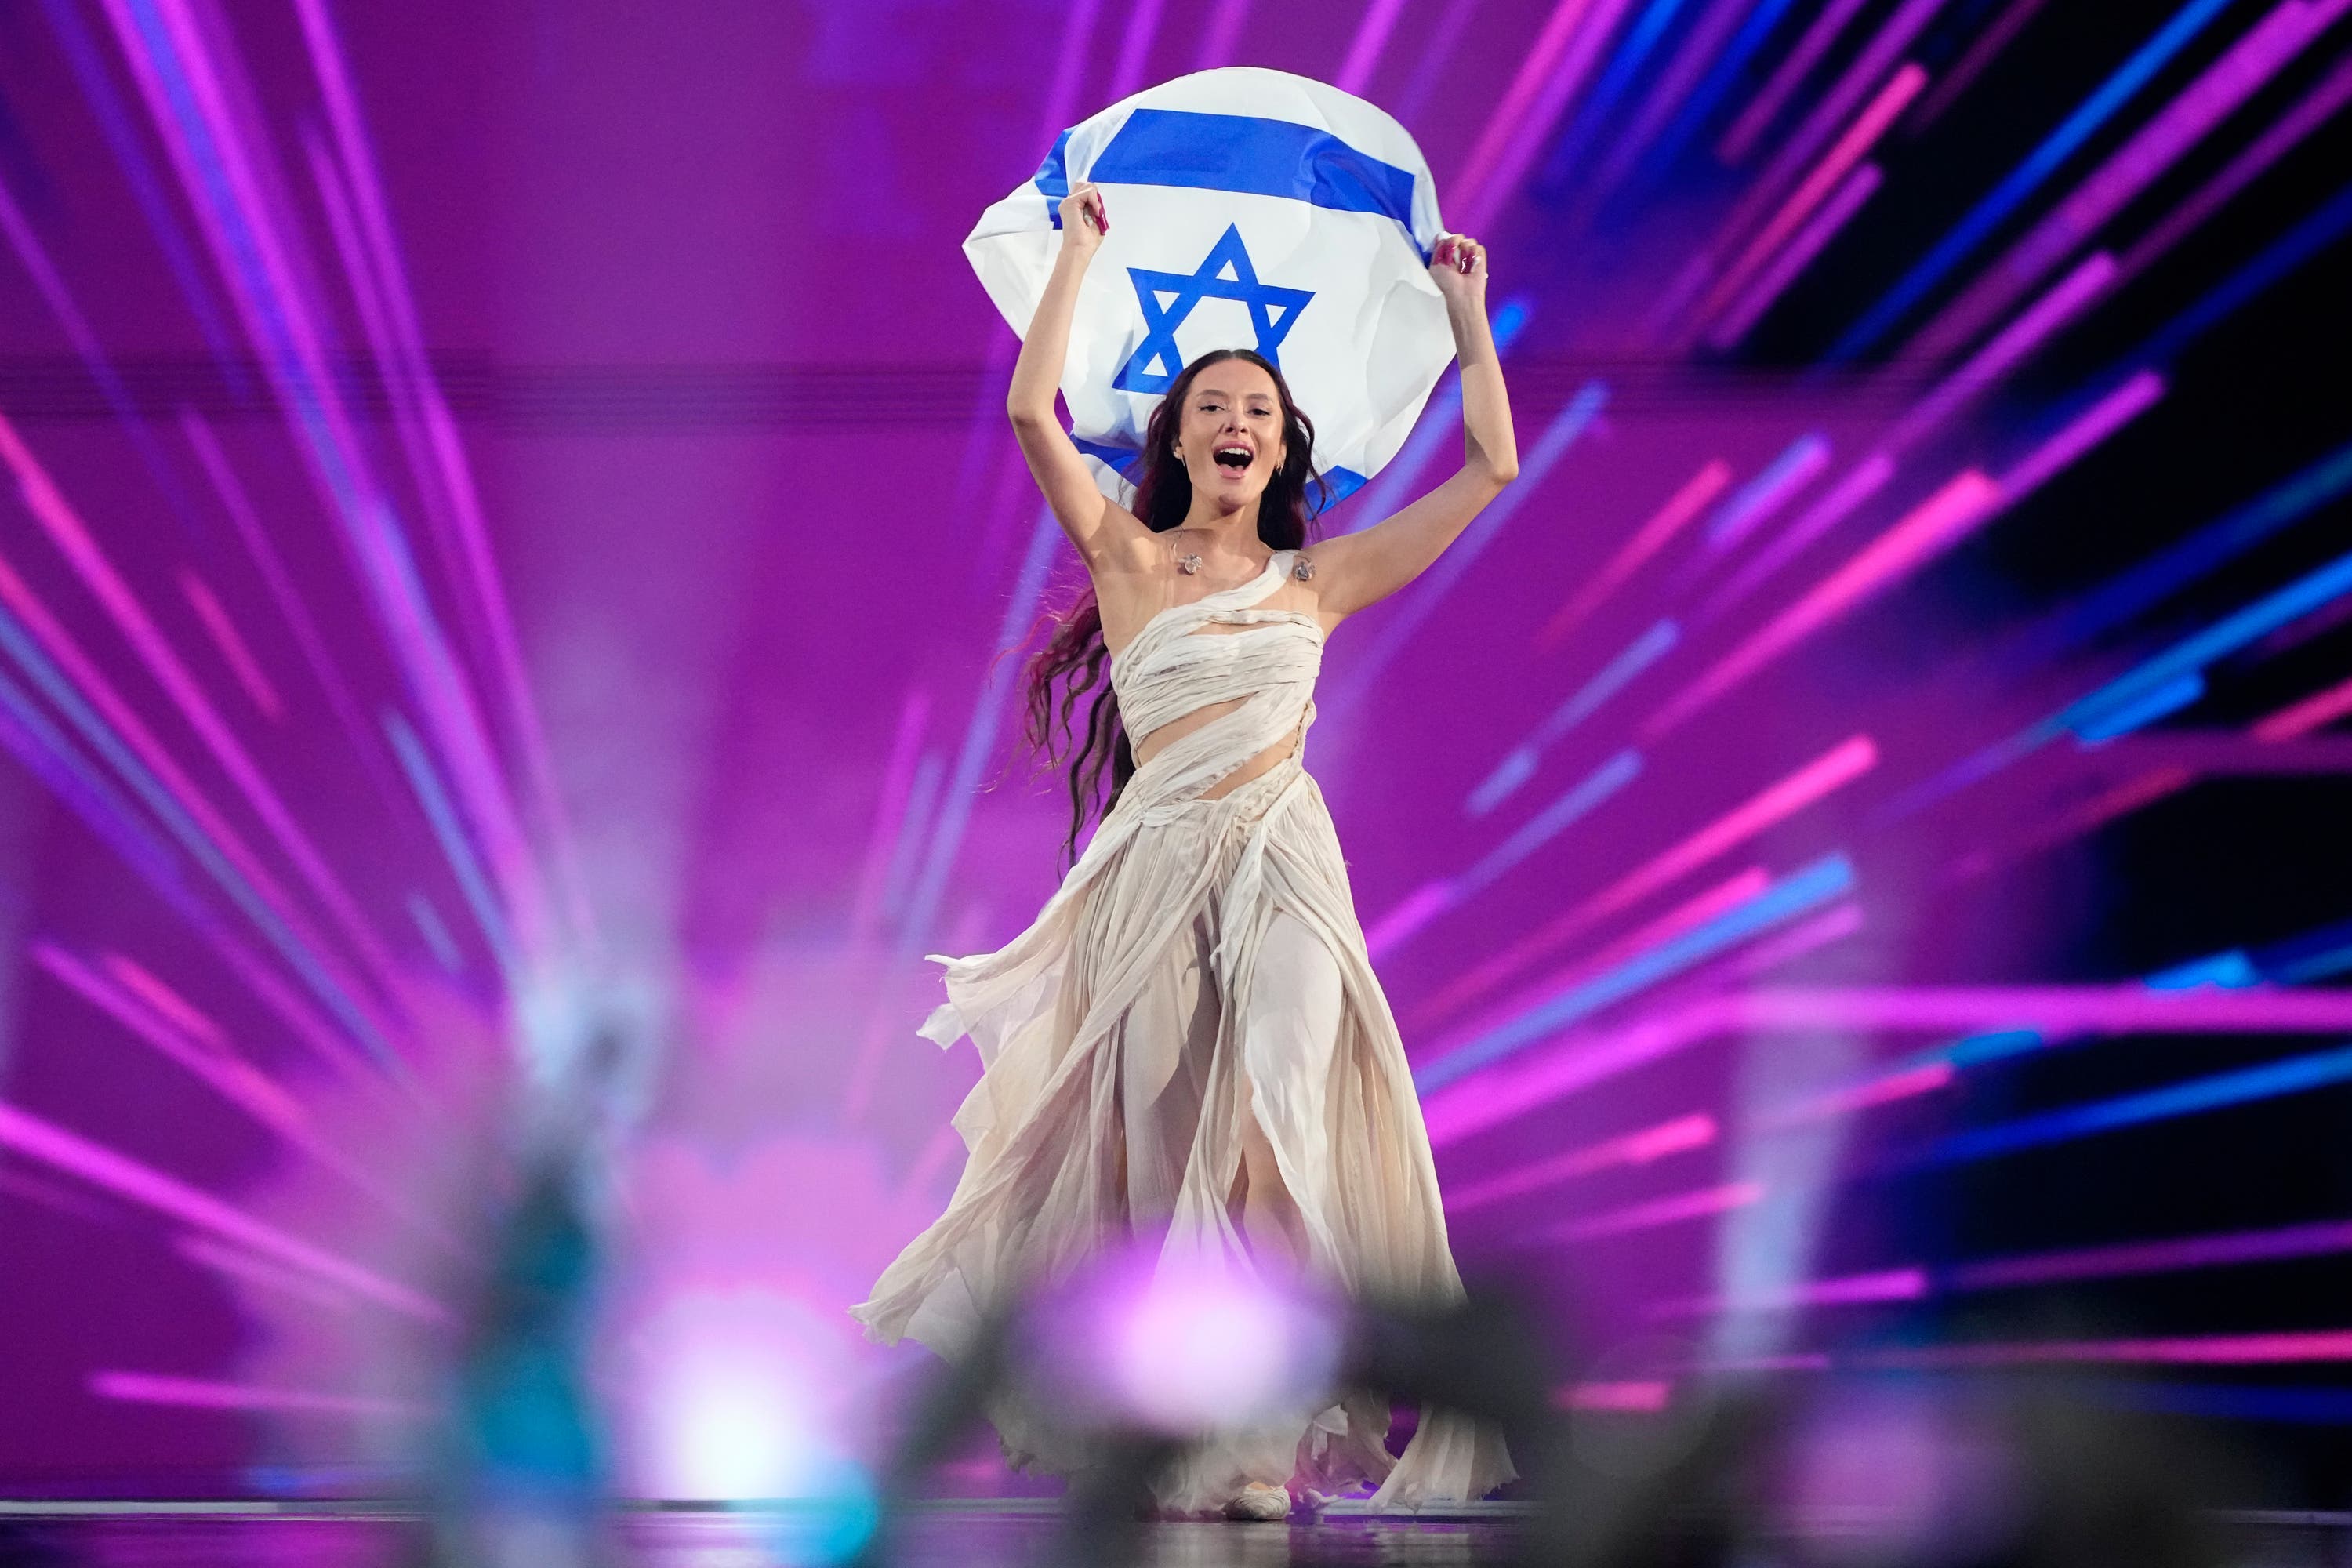 Eden Golan of Israel enters the arena during the flag parade before the grand final of the Eurovision Song Contest in Malmo.